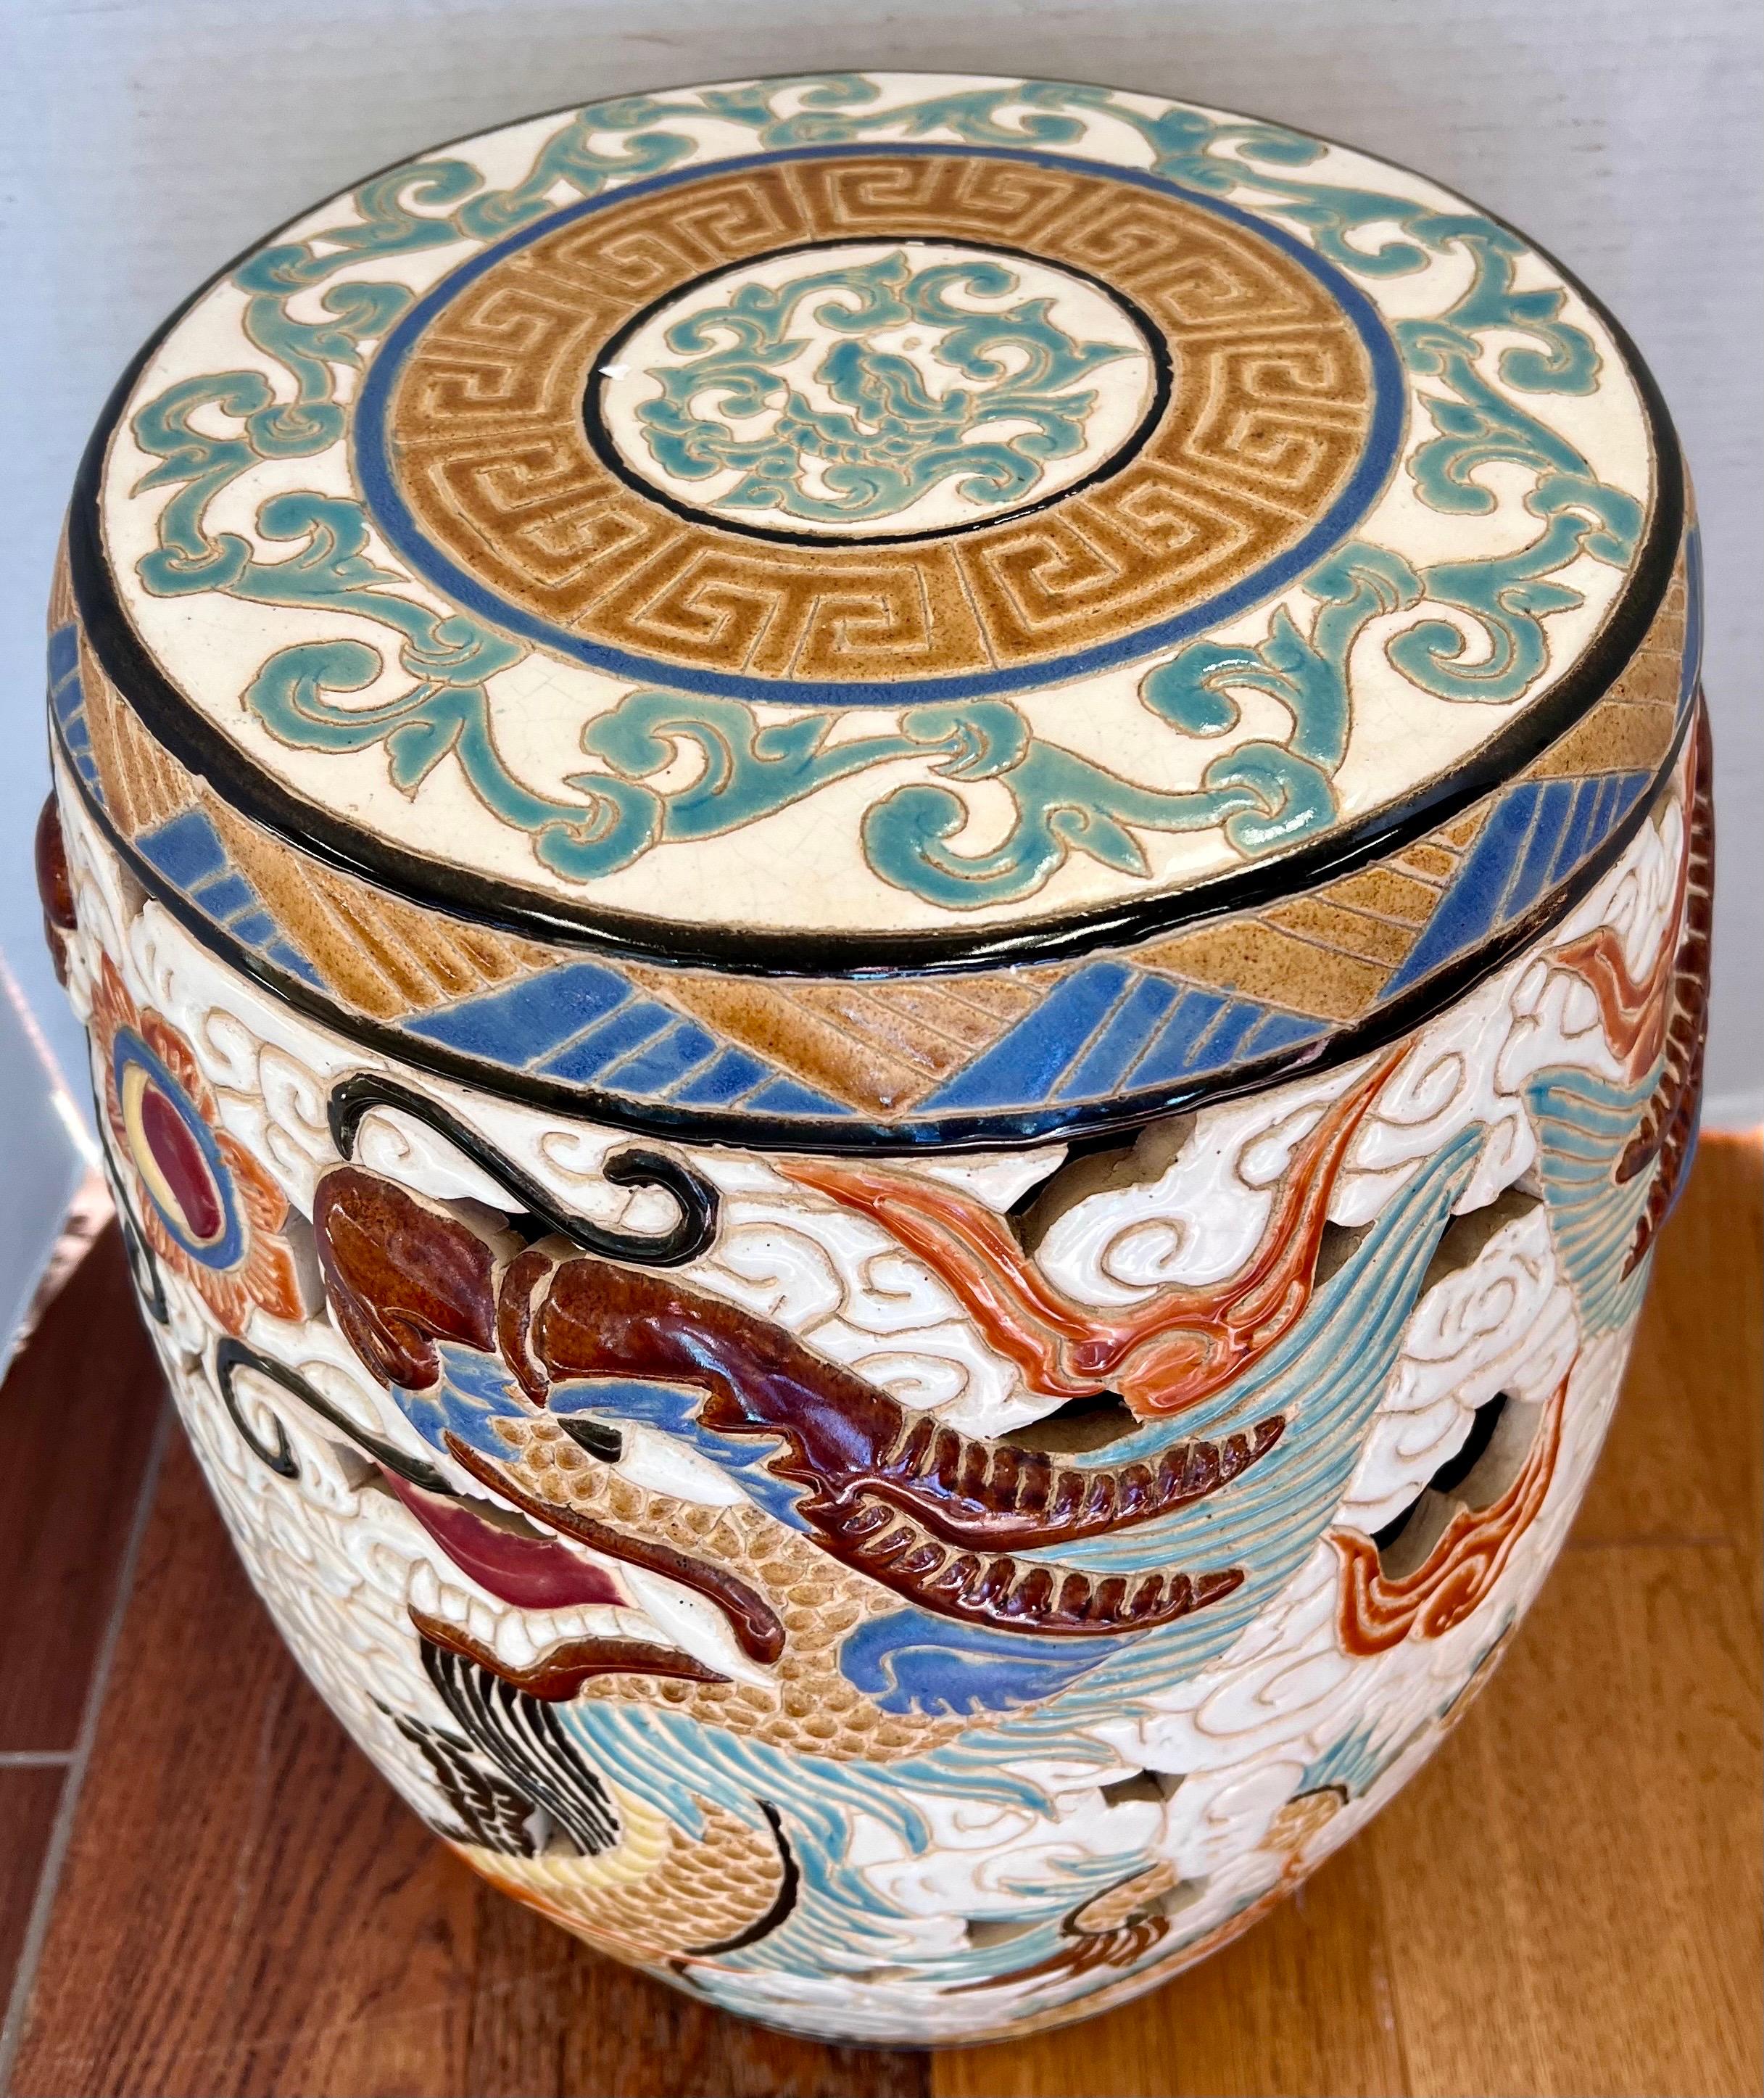 Stunning mid century Chinese chinoiserie style ceramic garden stool with carved dragons in the clouds all around.  No hallmarks at bottom.